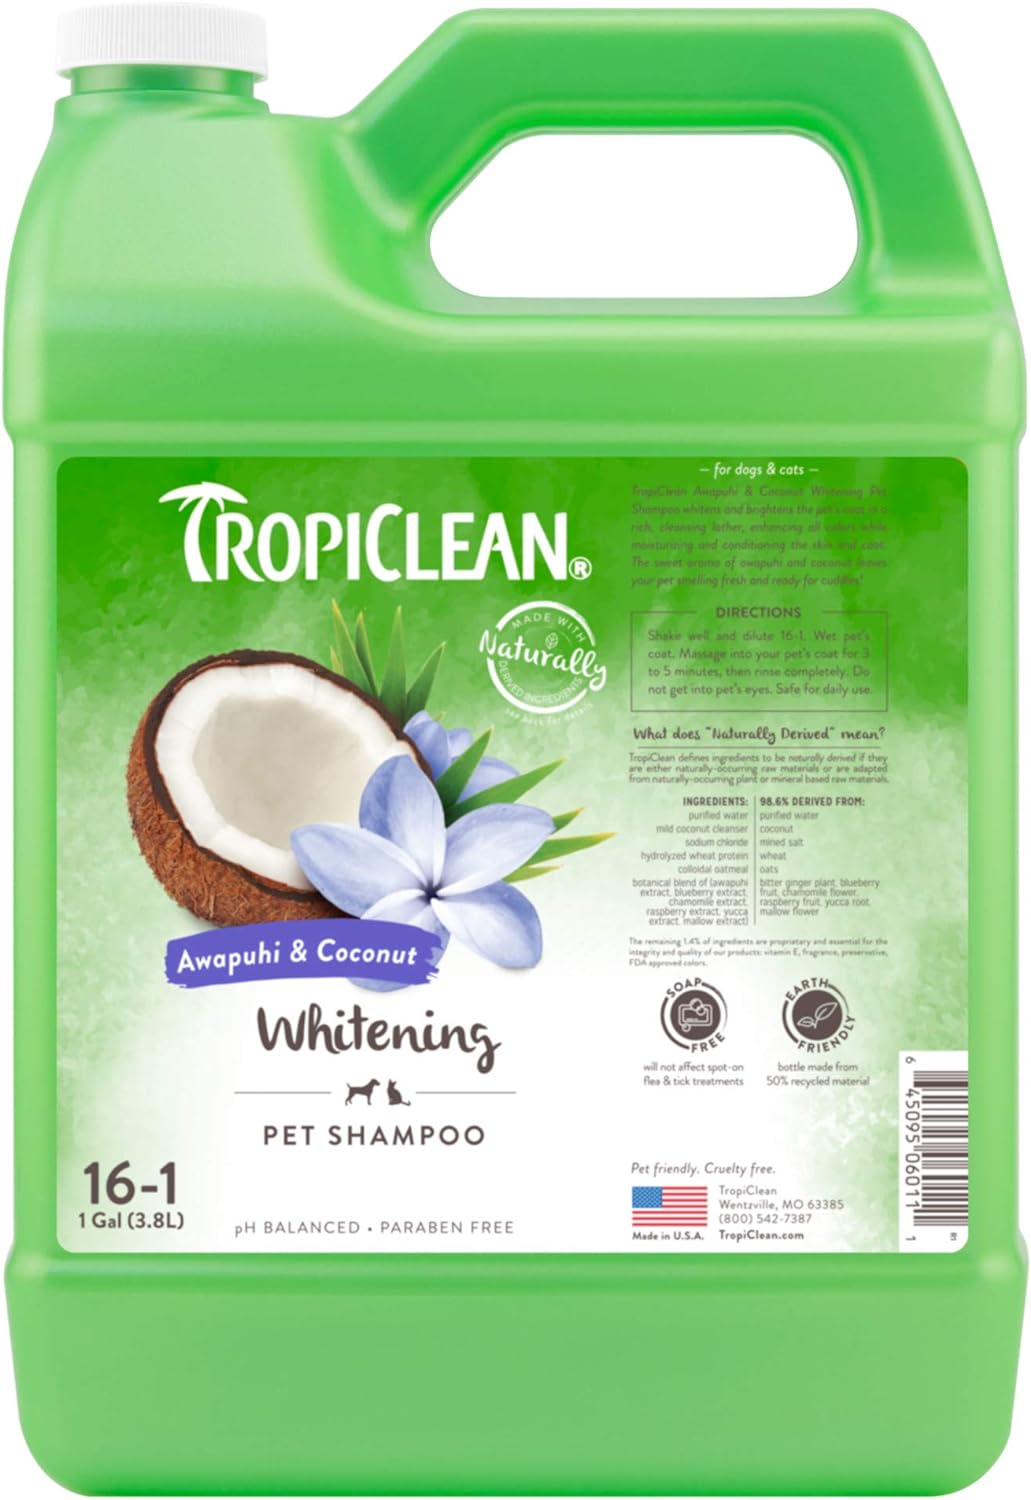 TropiClean Dog Shampoo Grooming Supplies - Whitening Dog and Cat Shampoo for Whitening Coats - Soap and Paraben Free -Derived from Natural Ingredients - Used by Groomers - Awapuhi & Coconut, 3.8L?TRAWSH1G